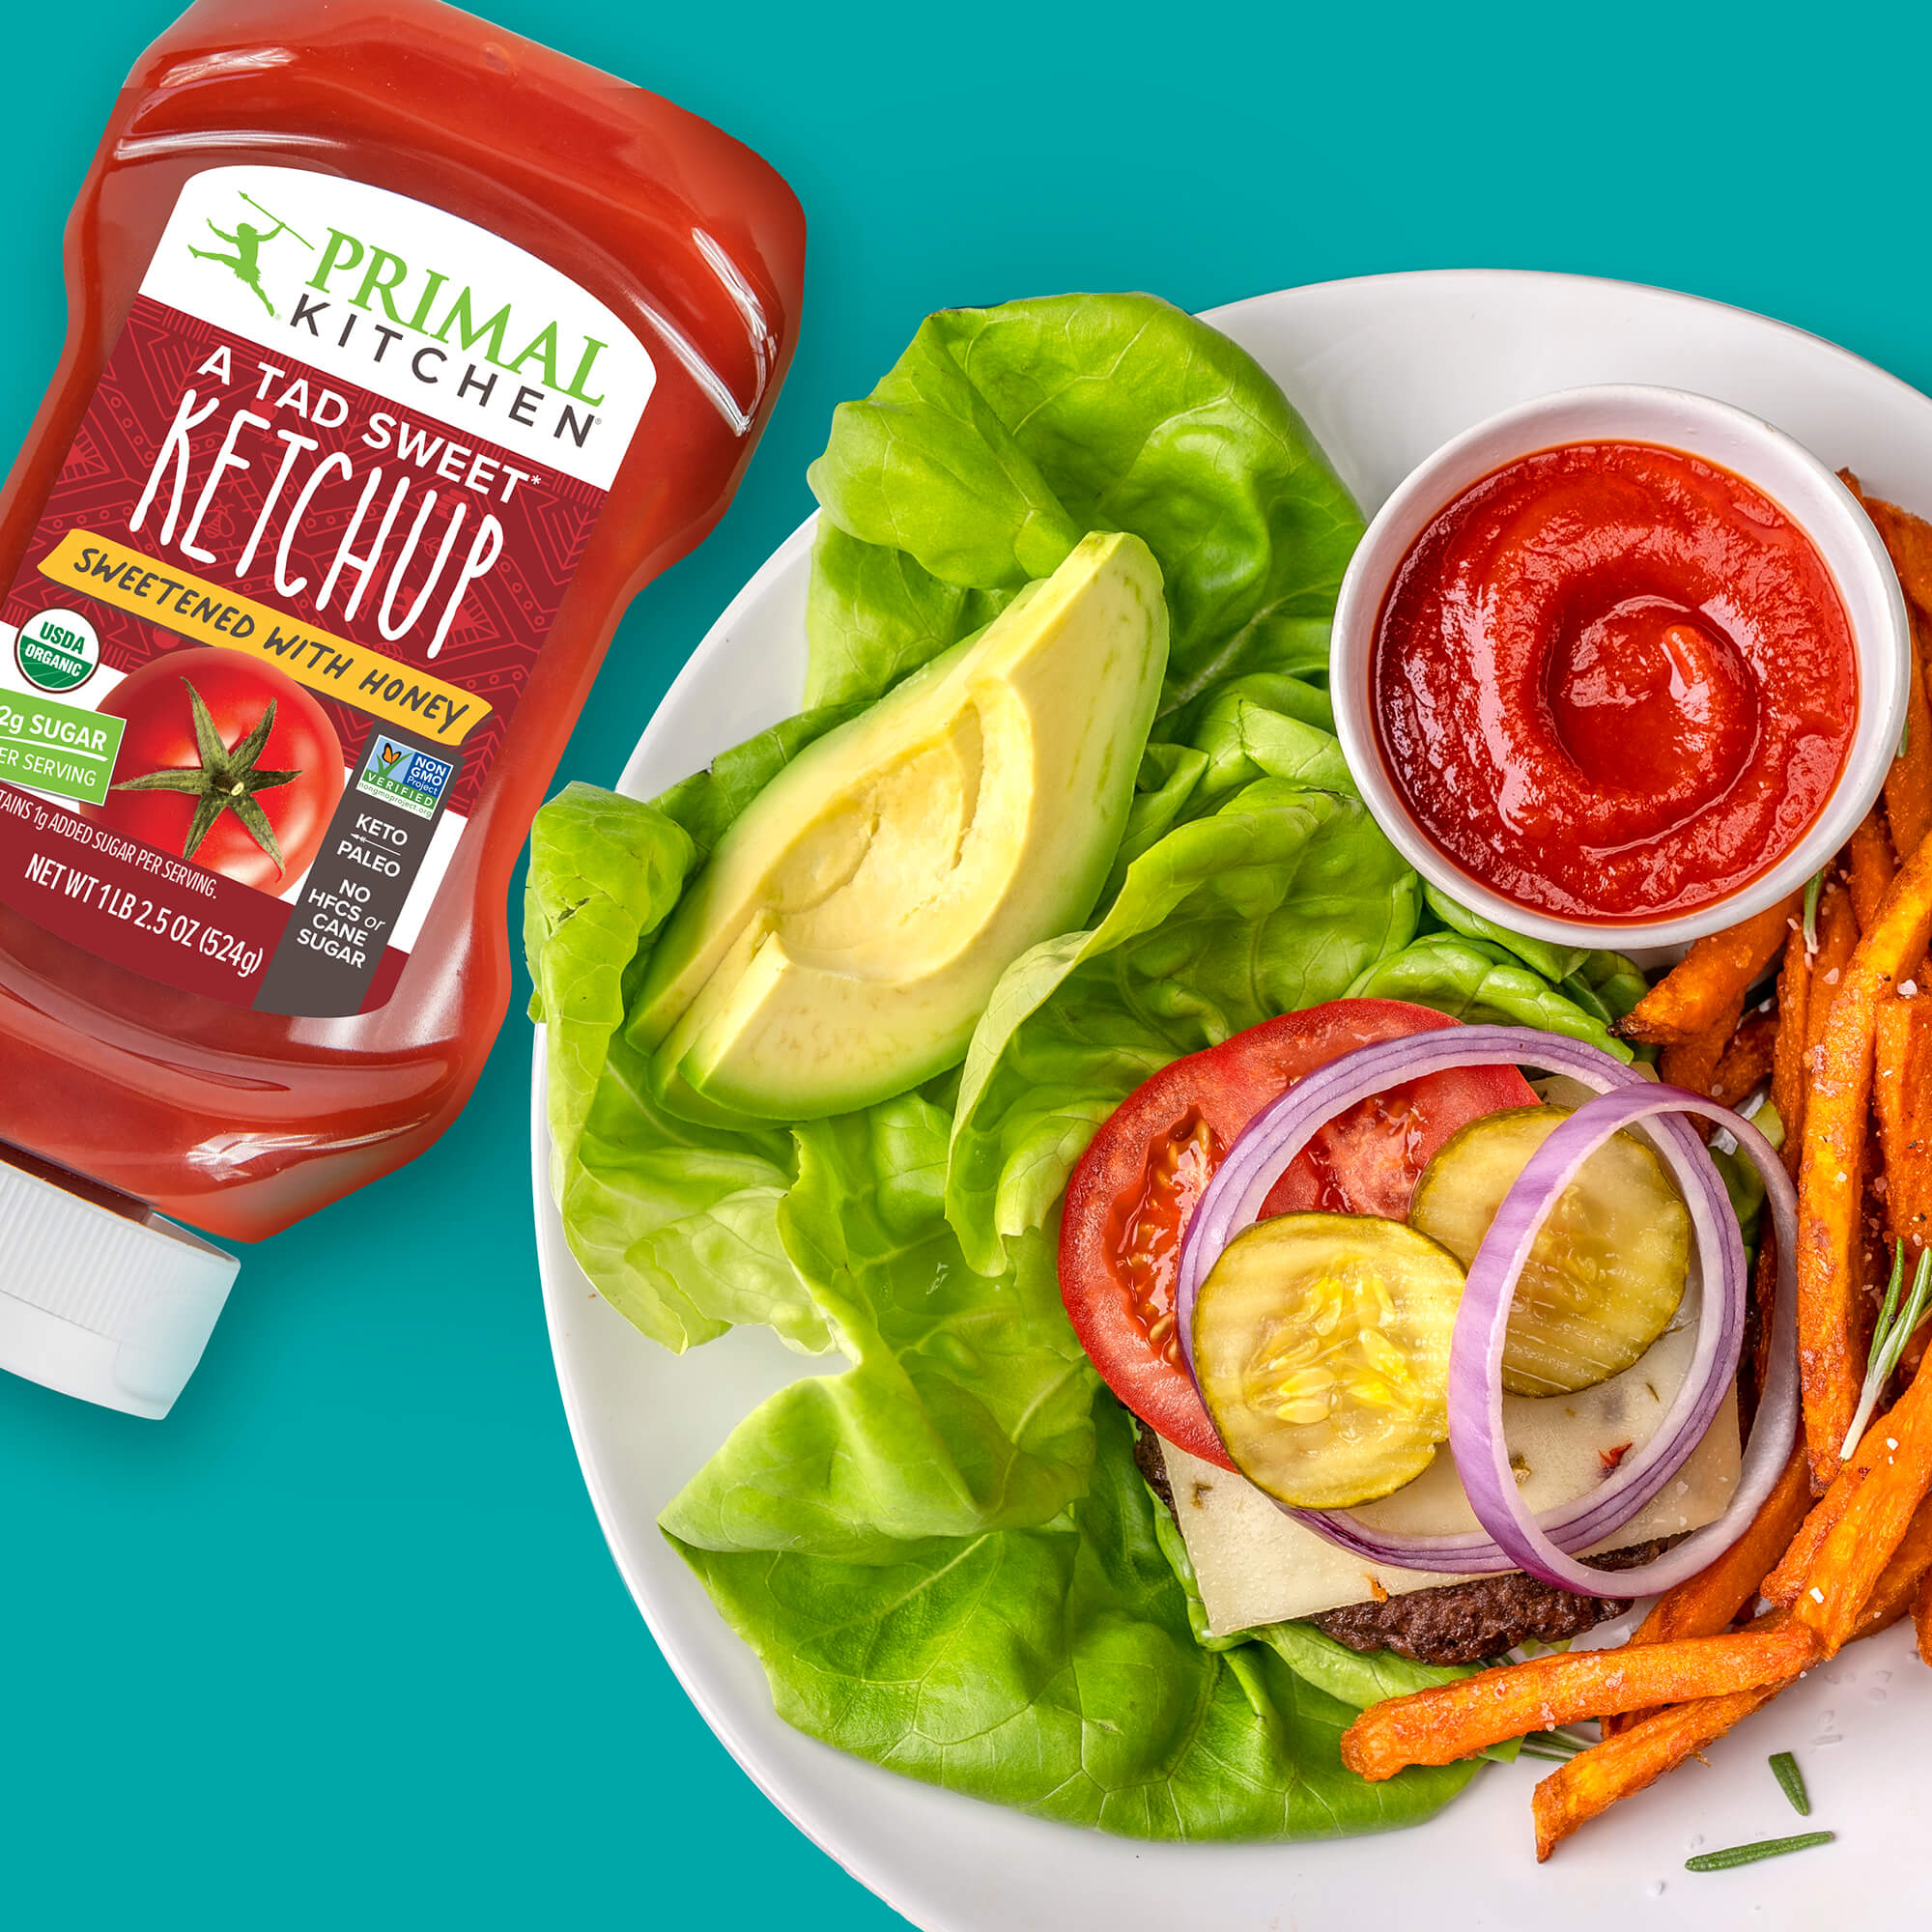 A Tad Sweet Squeeze Ketchup bottle beside an open face lettuce wrapped paleo burger with a side of sweet potato fries on a teal background.